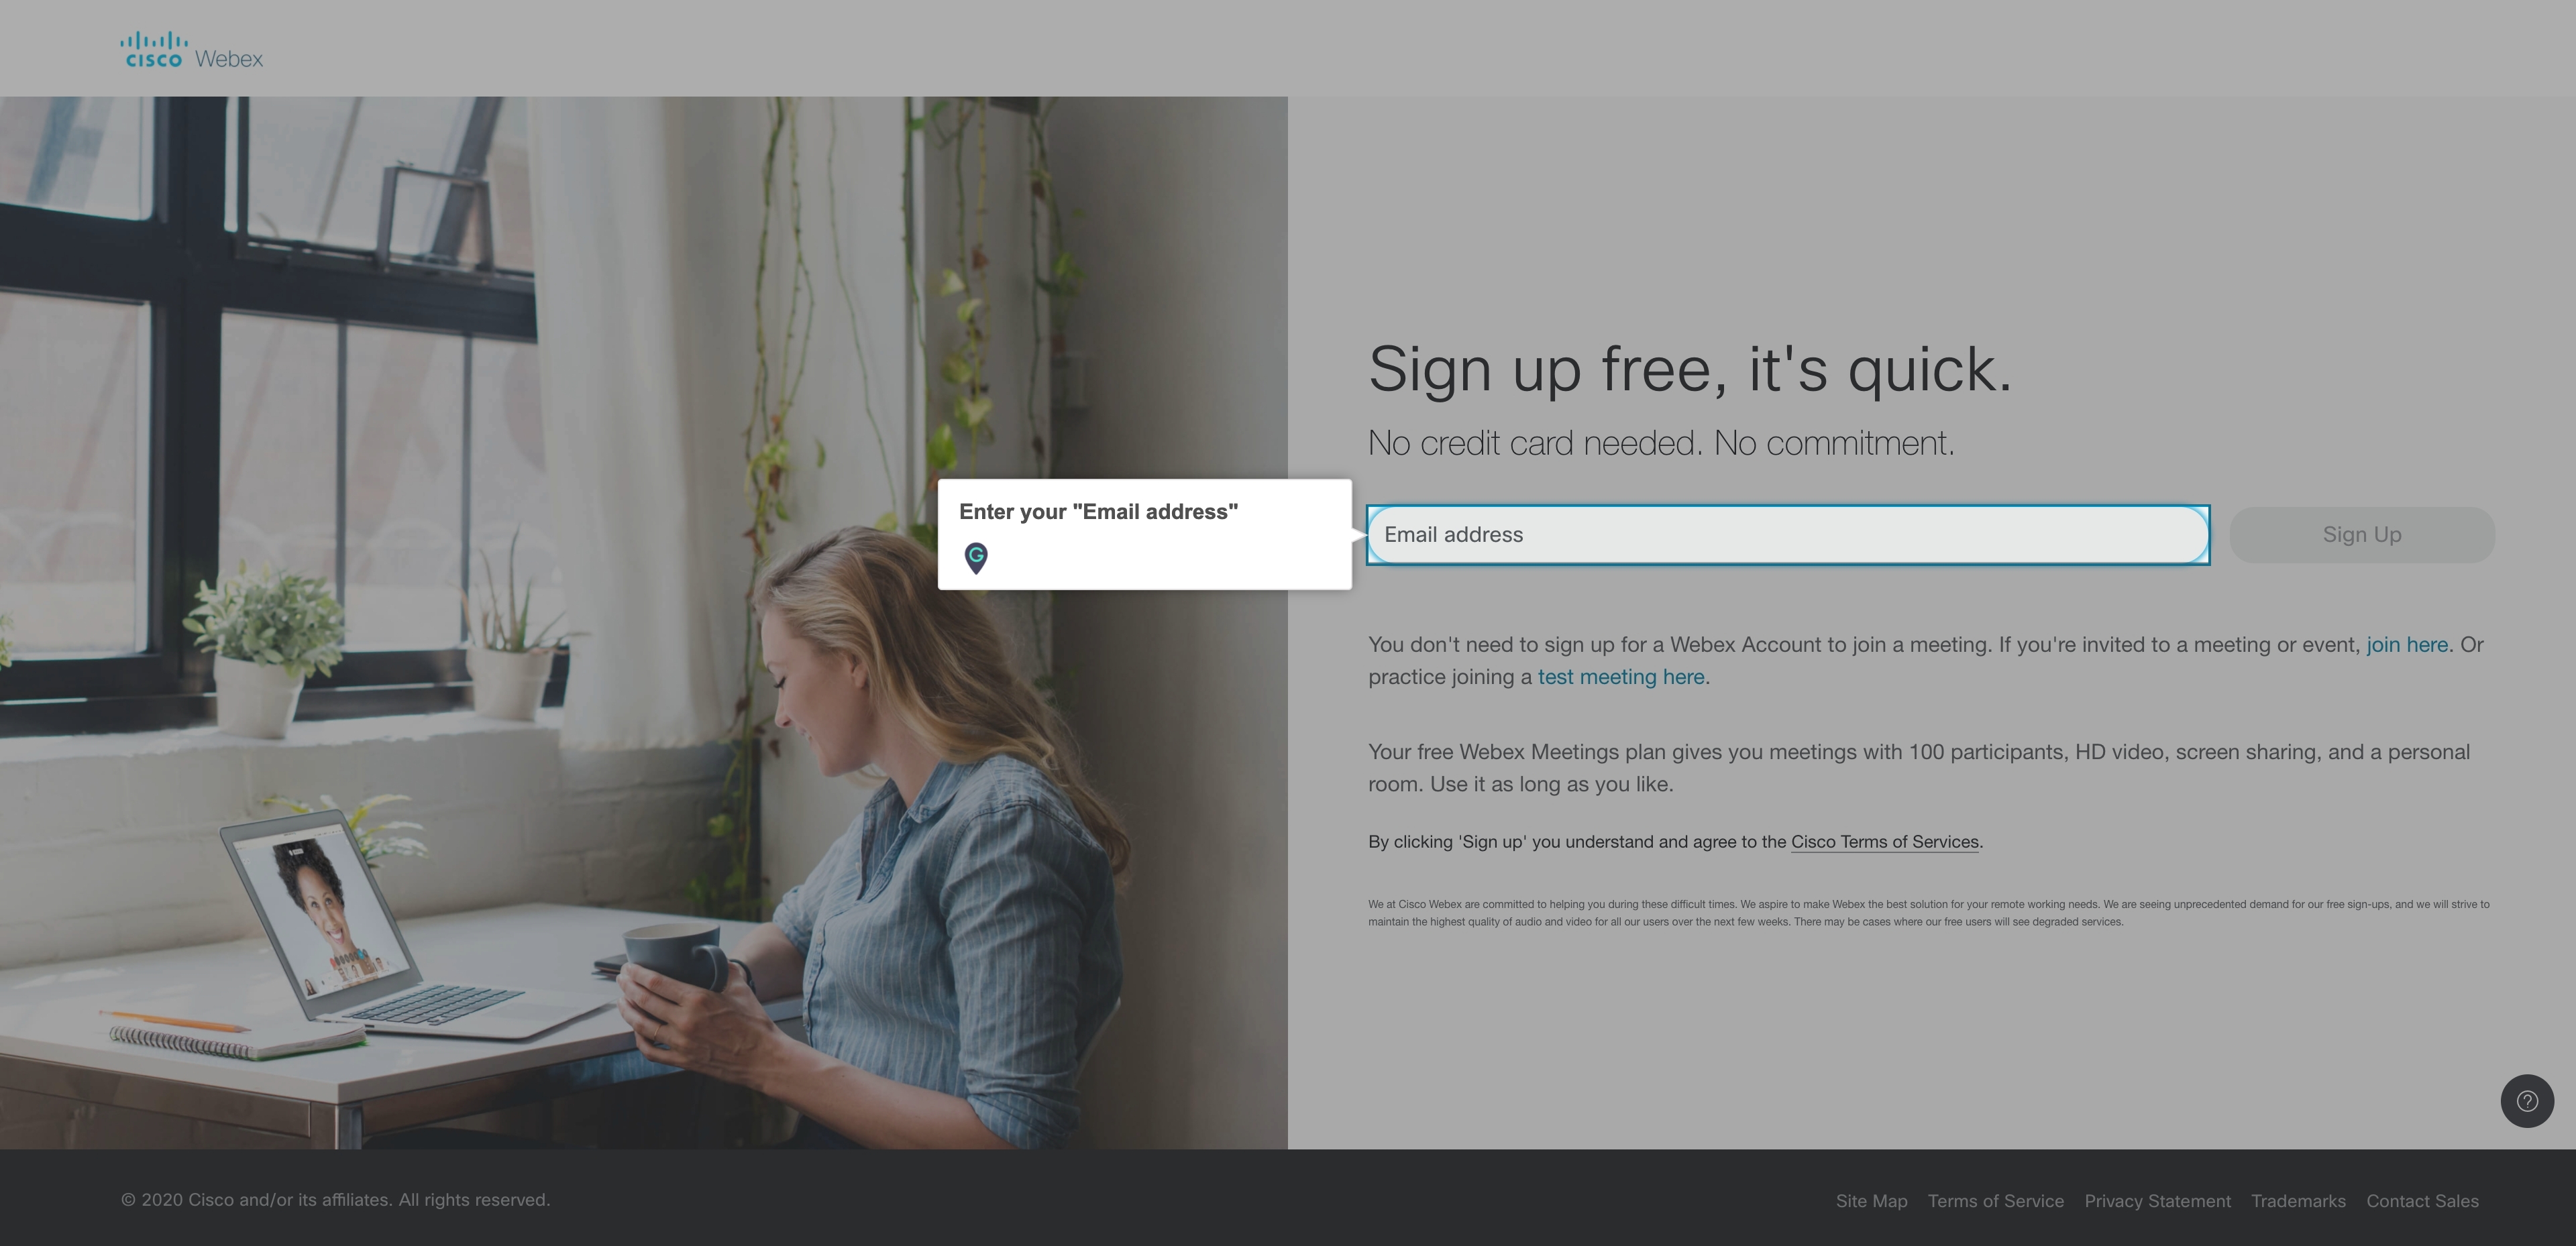 webex teams sign in again to continue using the app